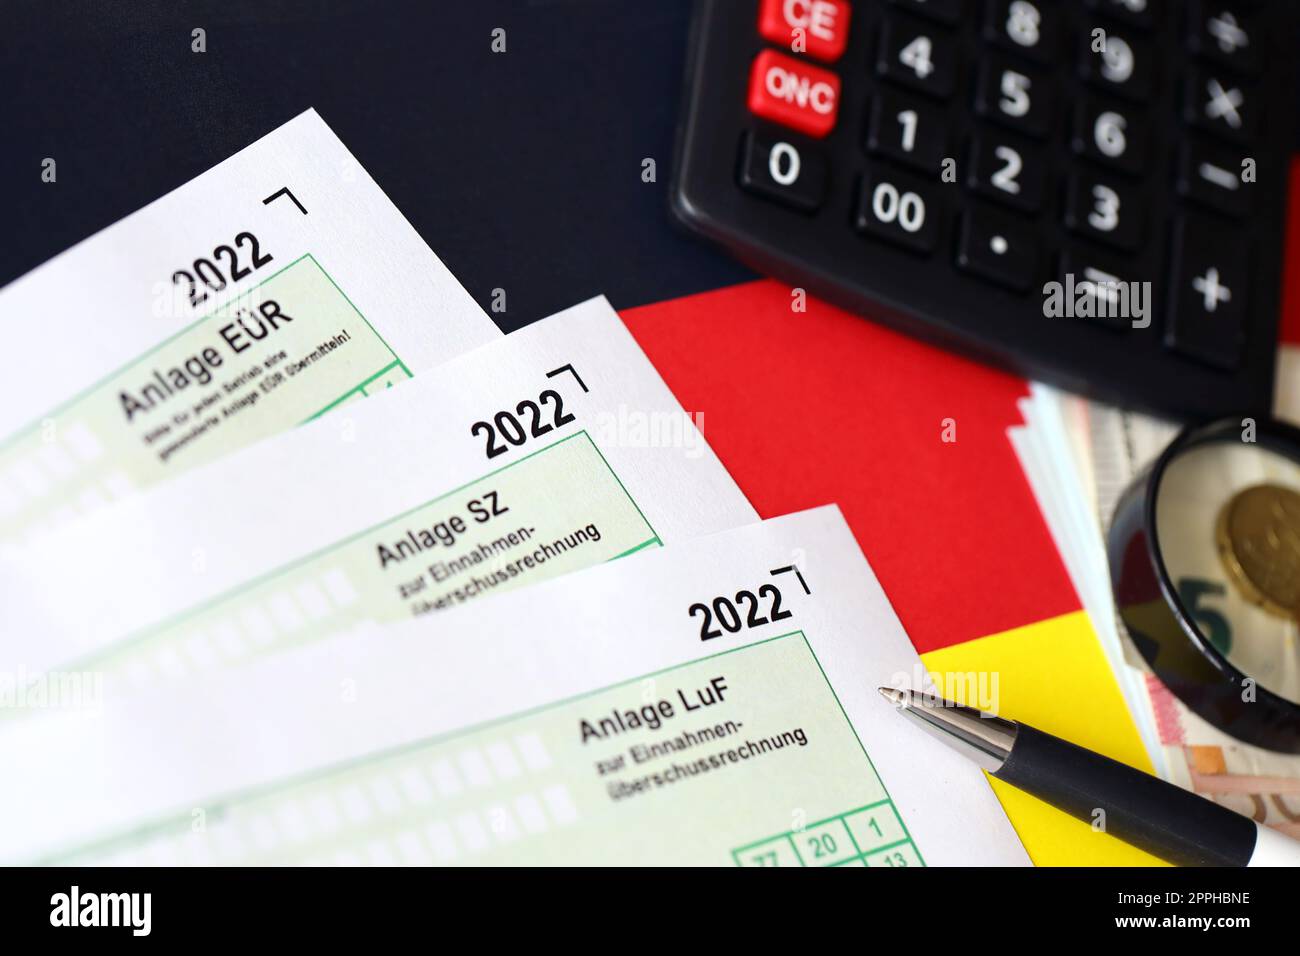 German different tax declaration blank forms - Anlage EUR, Anlage SZ and Anlage Luf. Documents lies with calculator, pen and european money Stock Photo